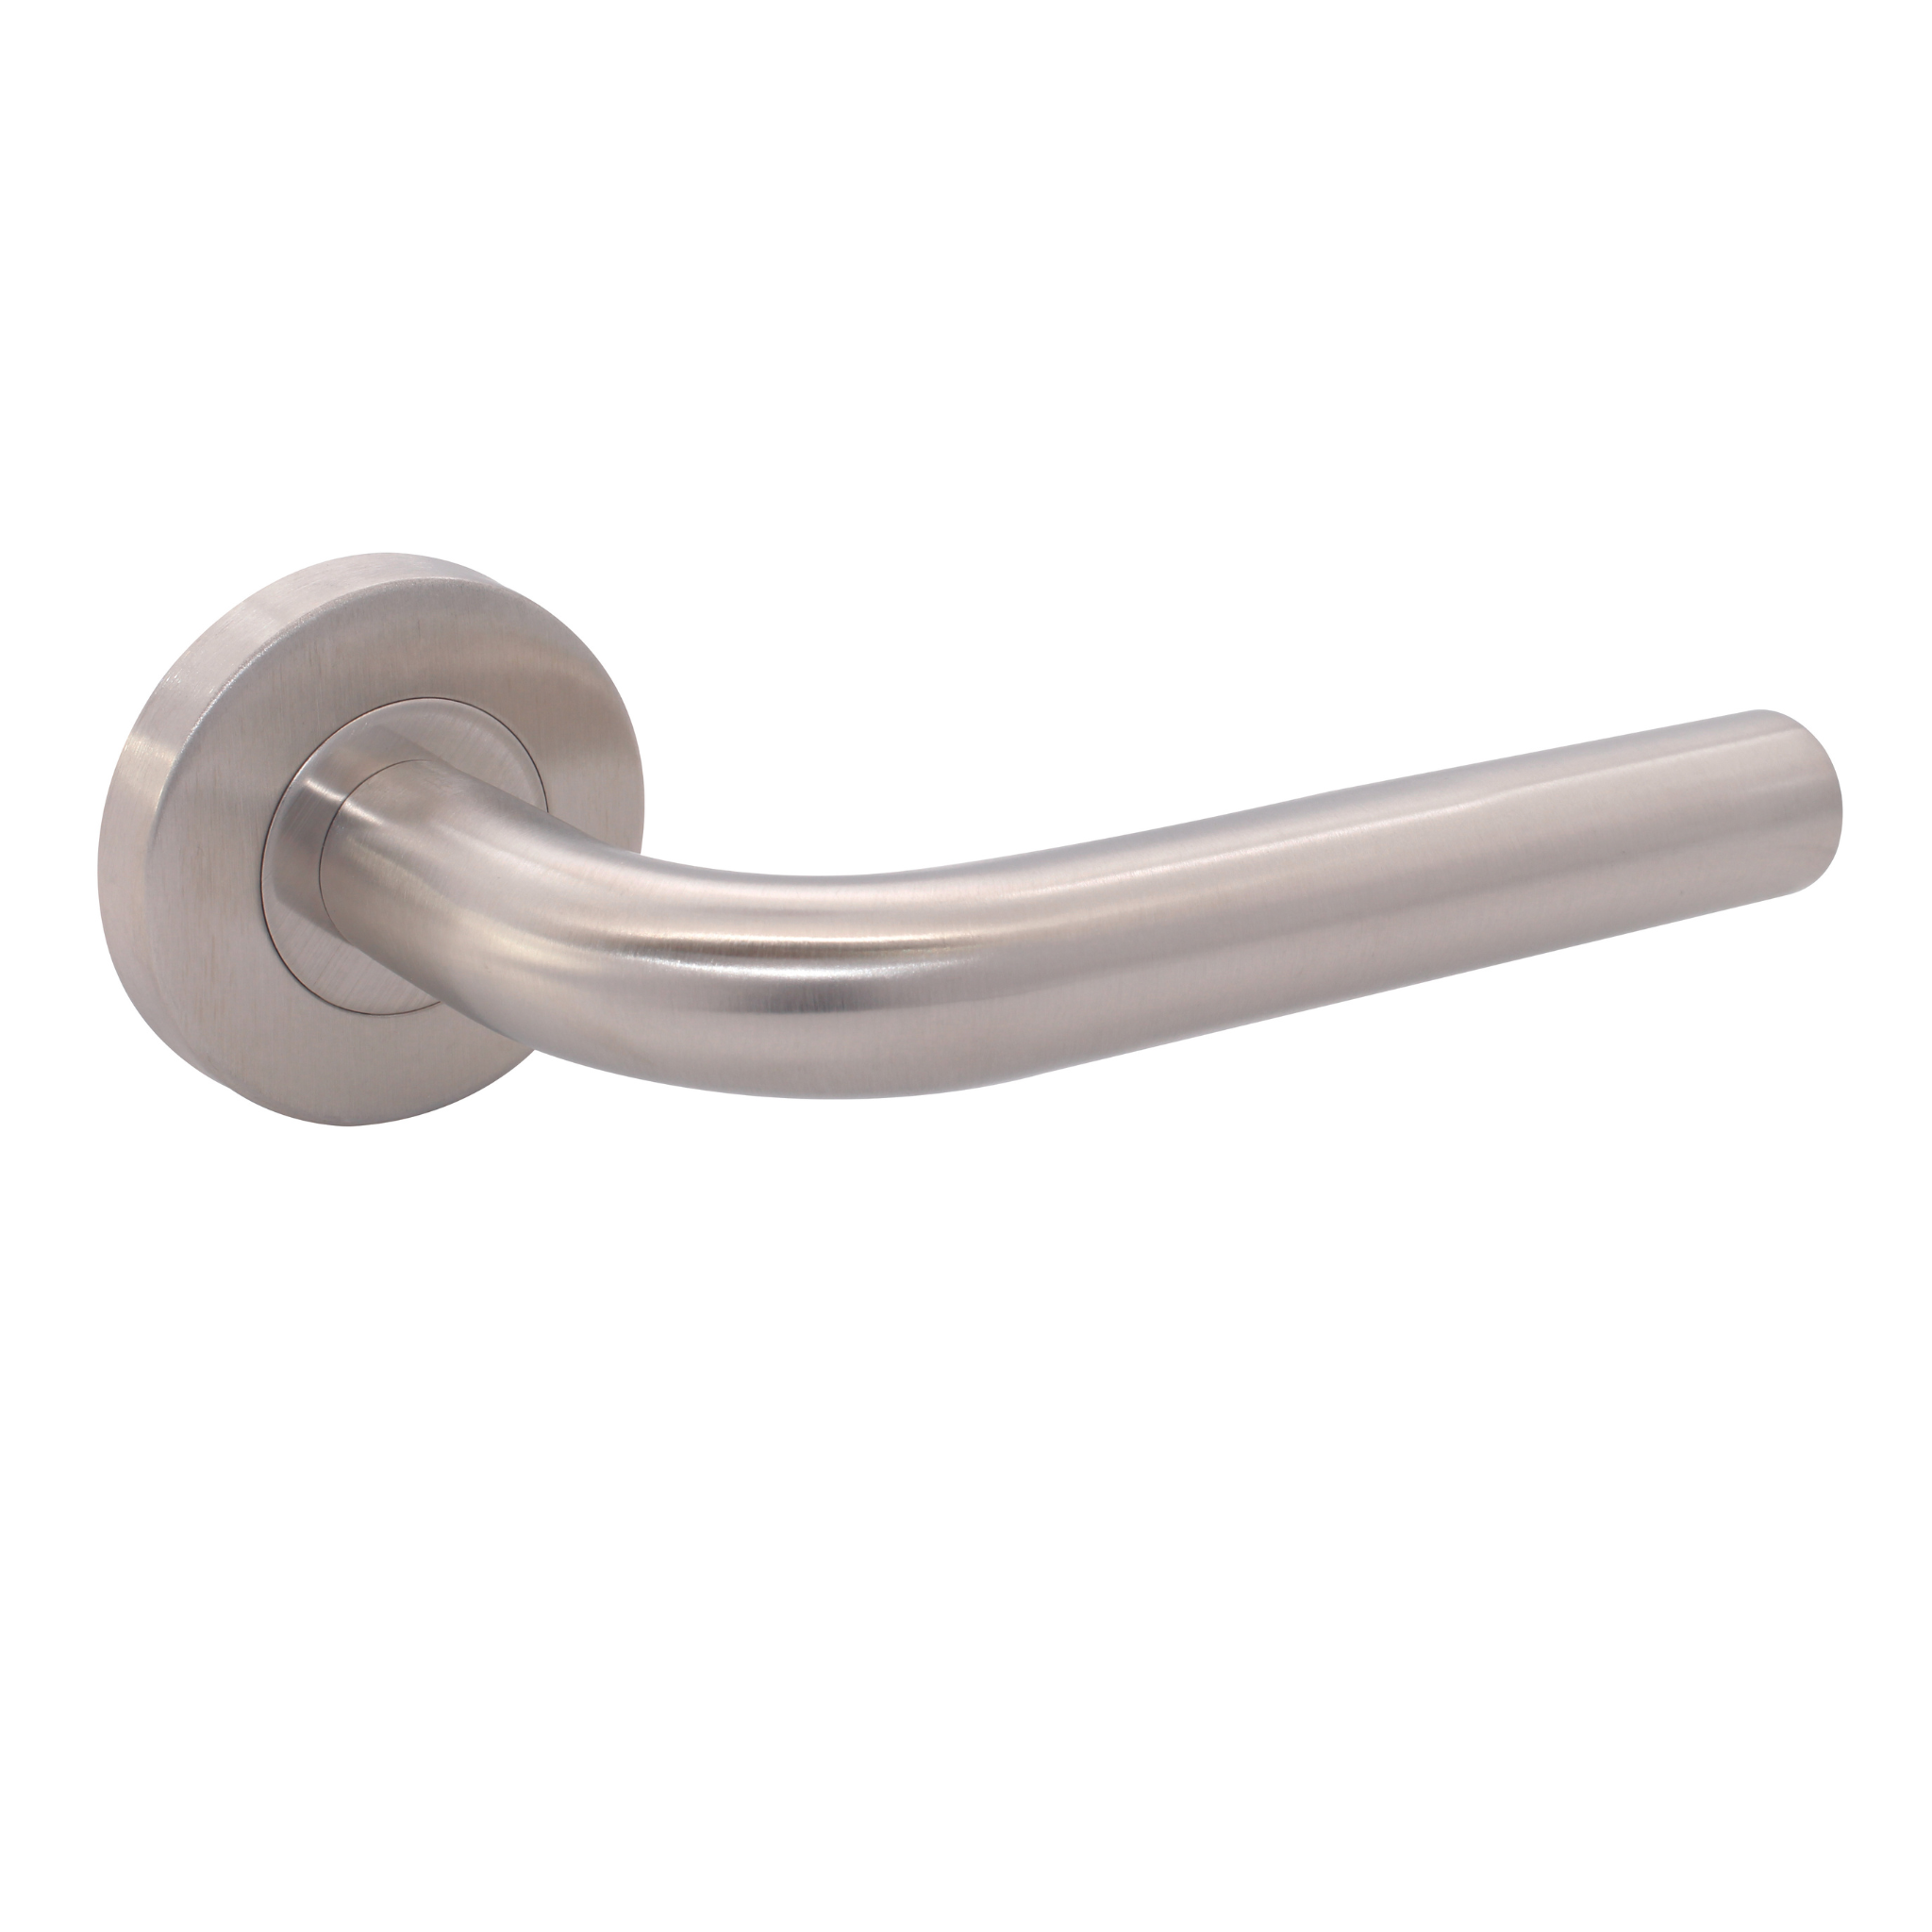 FT01.R._.TR, Lever Handles, Tubular, On Round Rose, With Escutcheons, 134mm (l), Stainless Steel with Tarnish Resistant, CISA